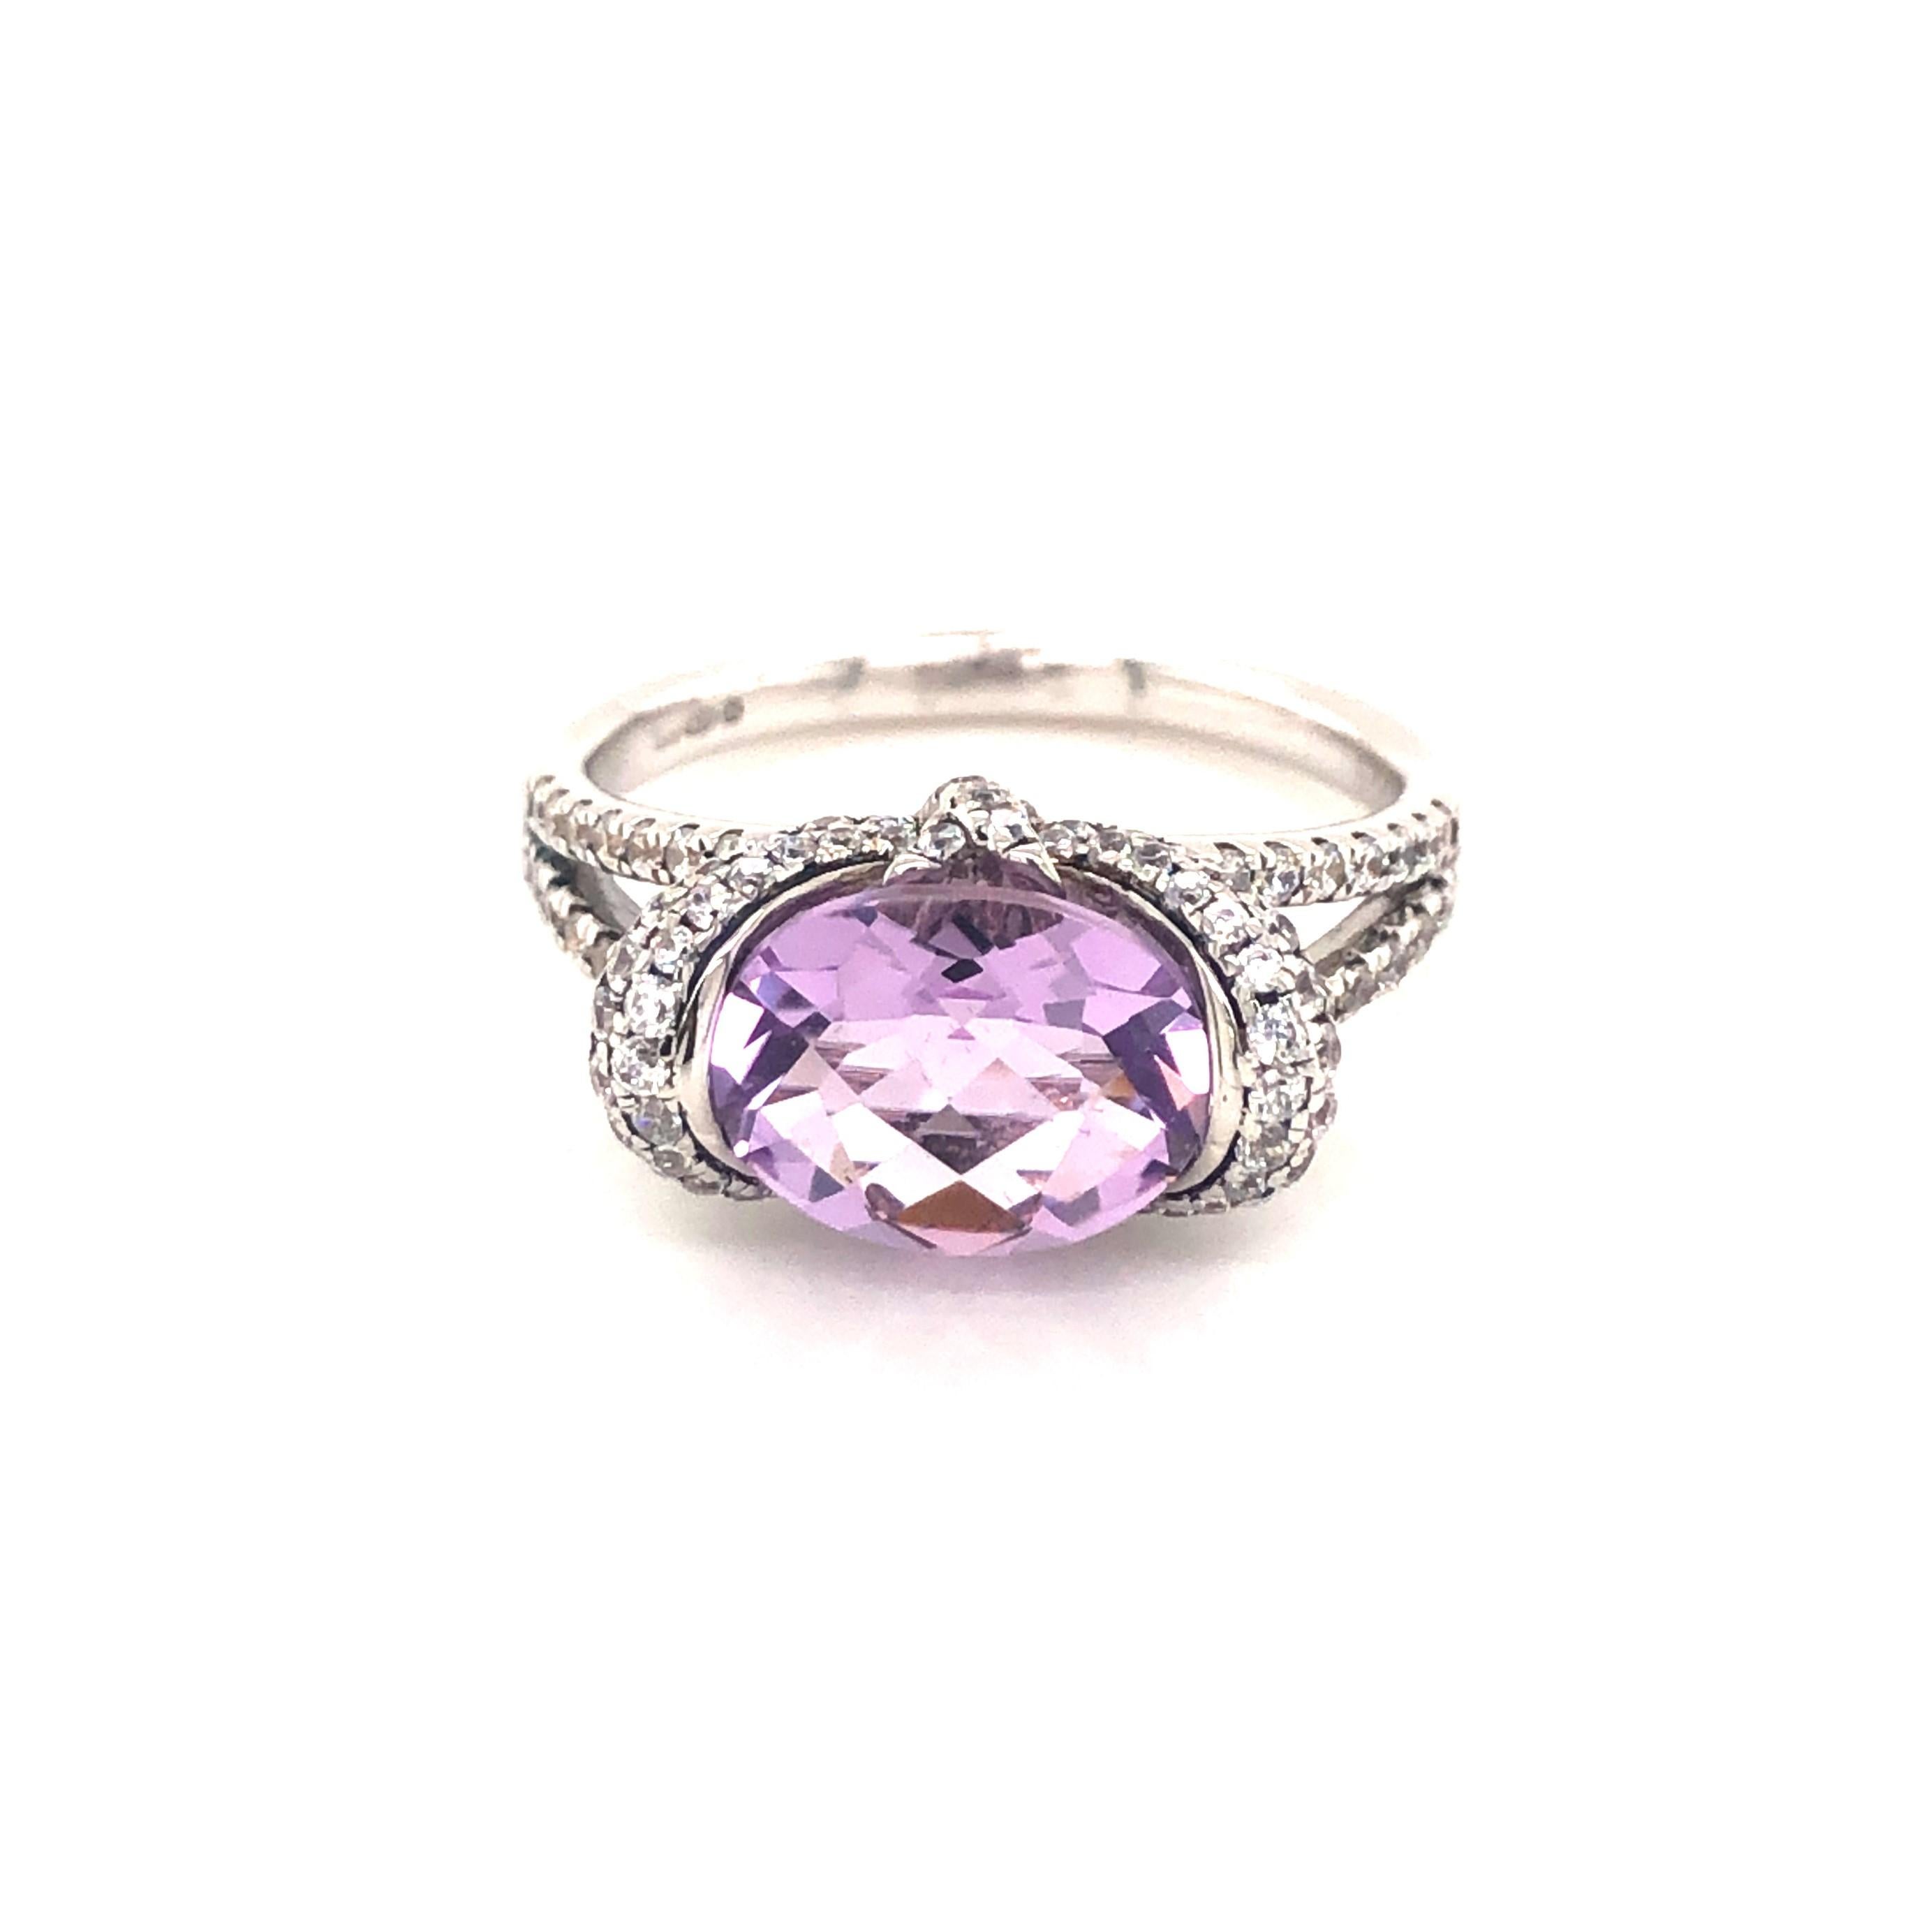 Bursting with vibrant violet hues, this beautifully multifaceted ring will attract admiring glances. 

Featuring an oval cushion cut amethyst weighing 1.37 carat, surrounded by 2.28 carat of round brilliant cut cubic zirconia, sitting majestically